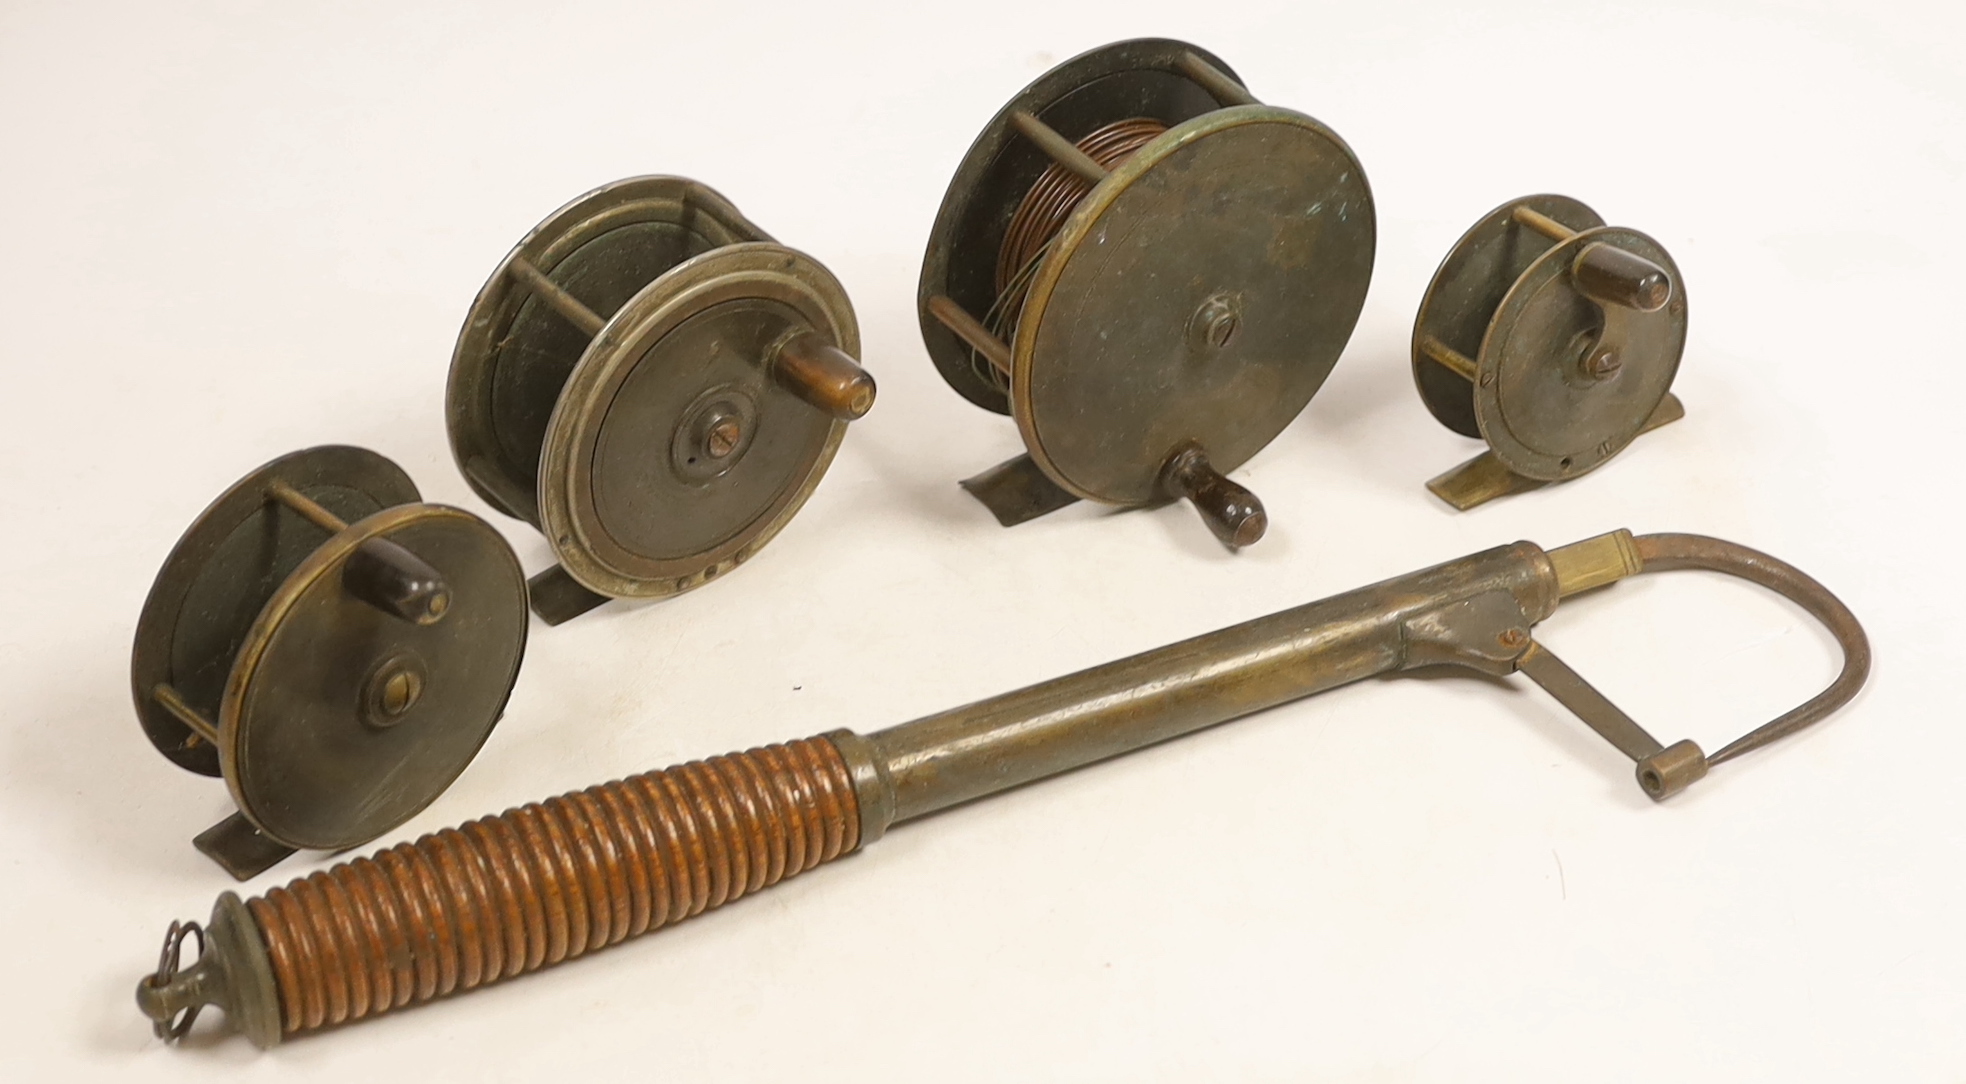 Four various sized fishing reels and a hook